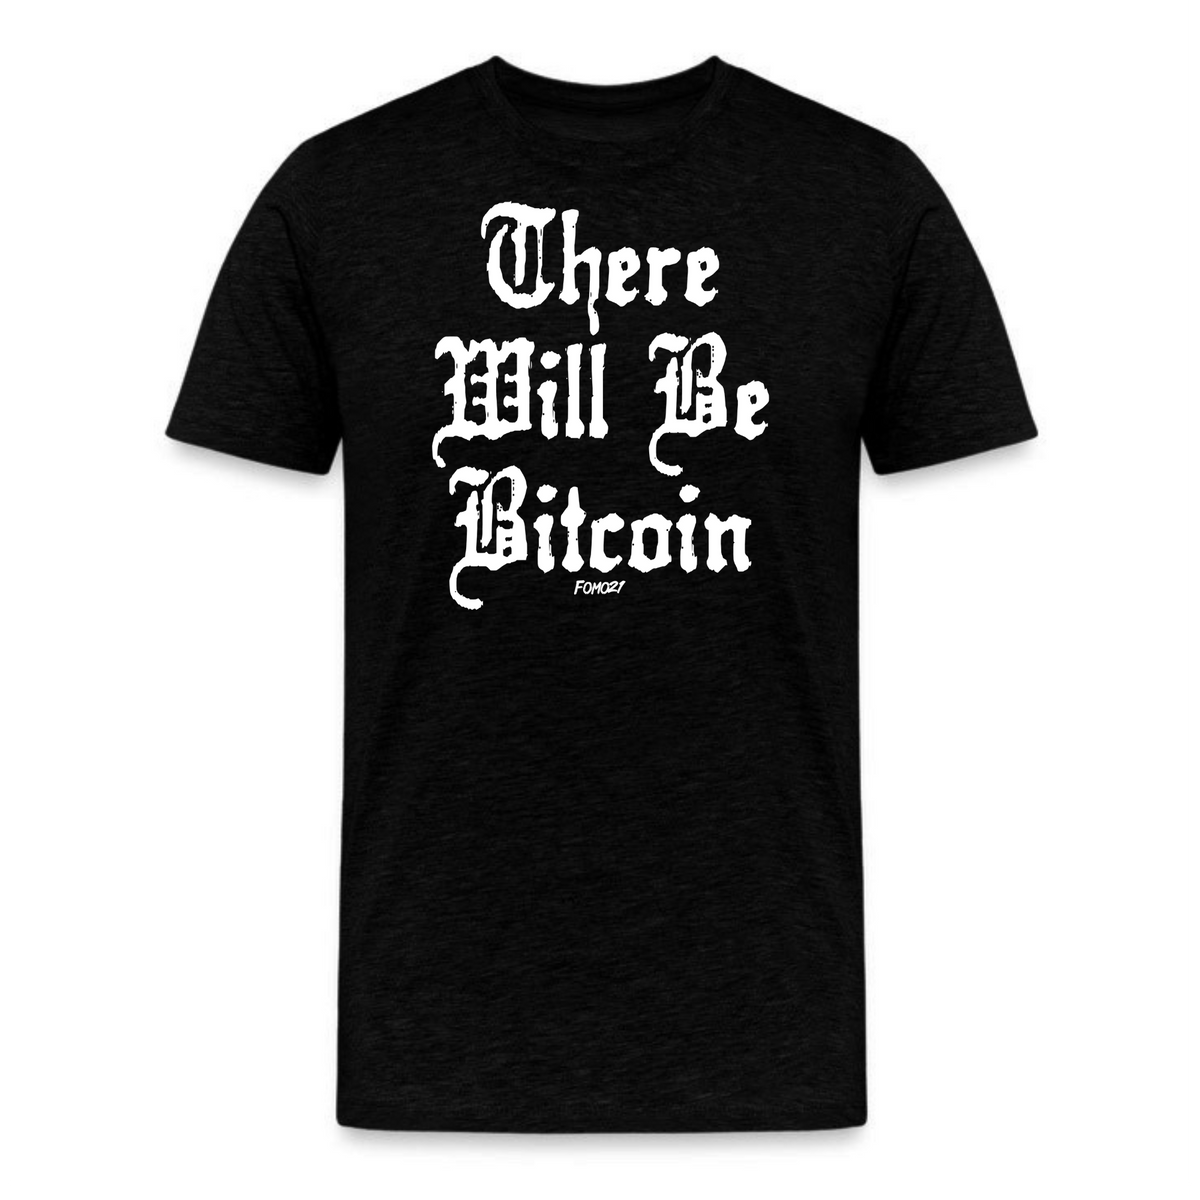 There Will Be Bitcoin T-Shirt - fomo21